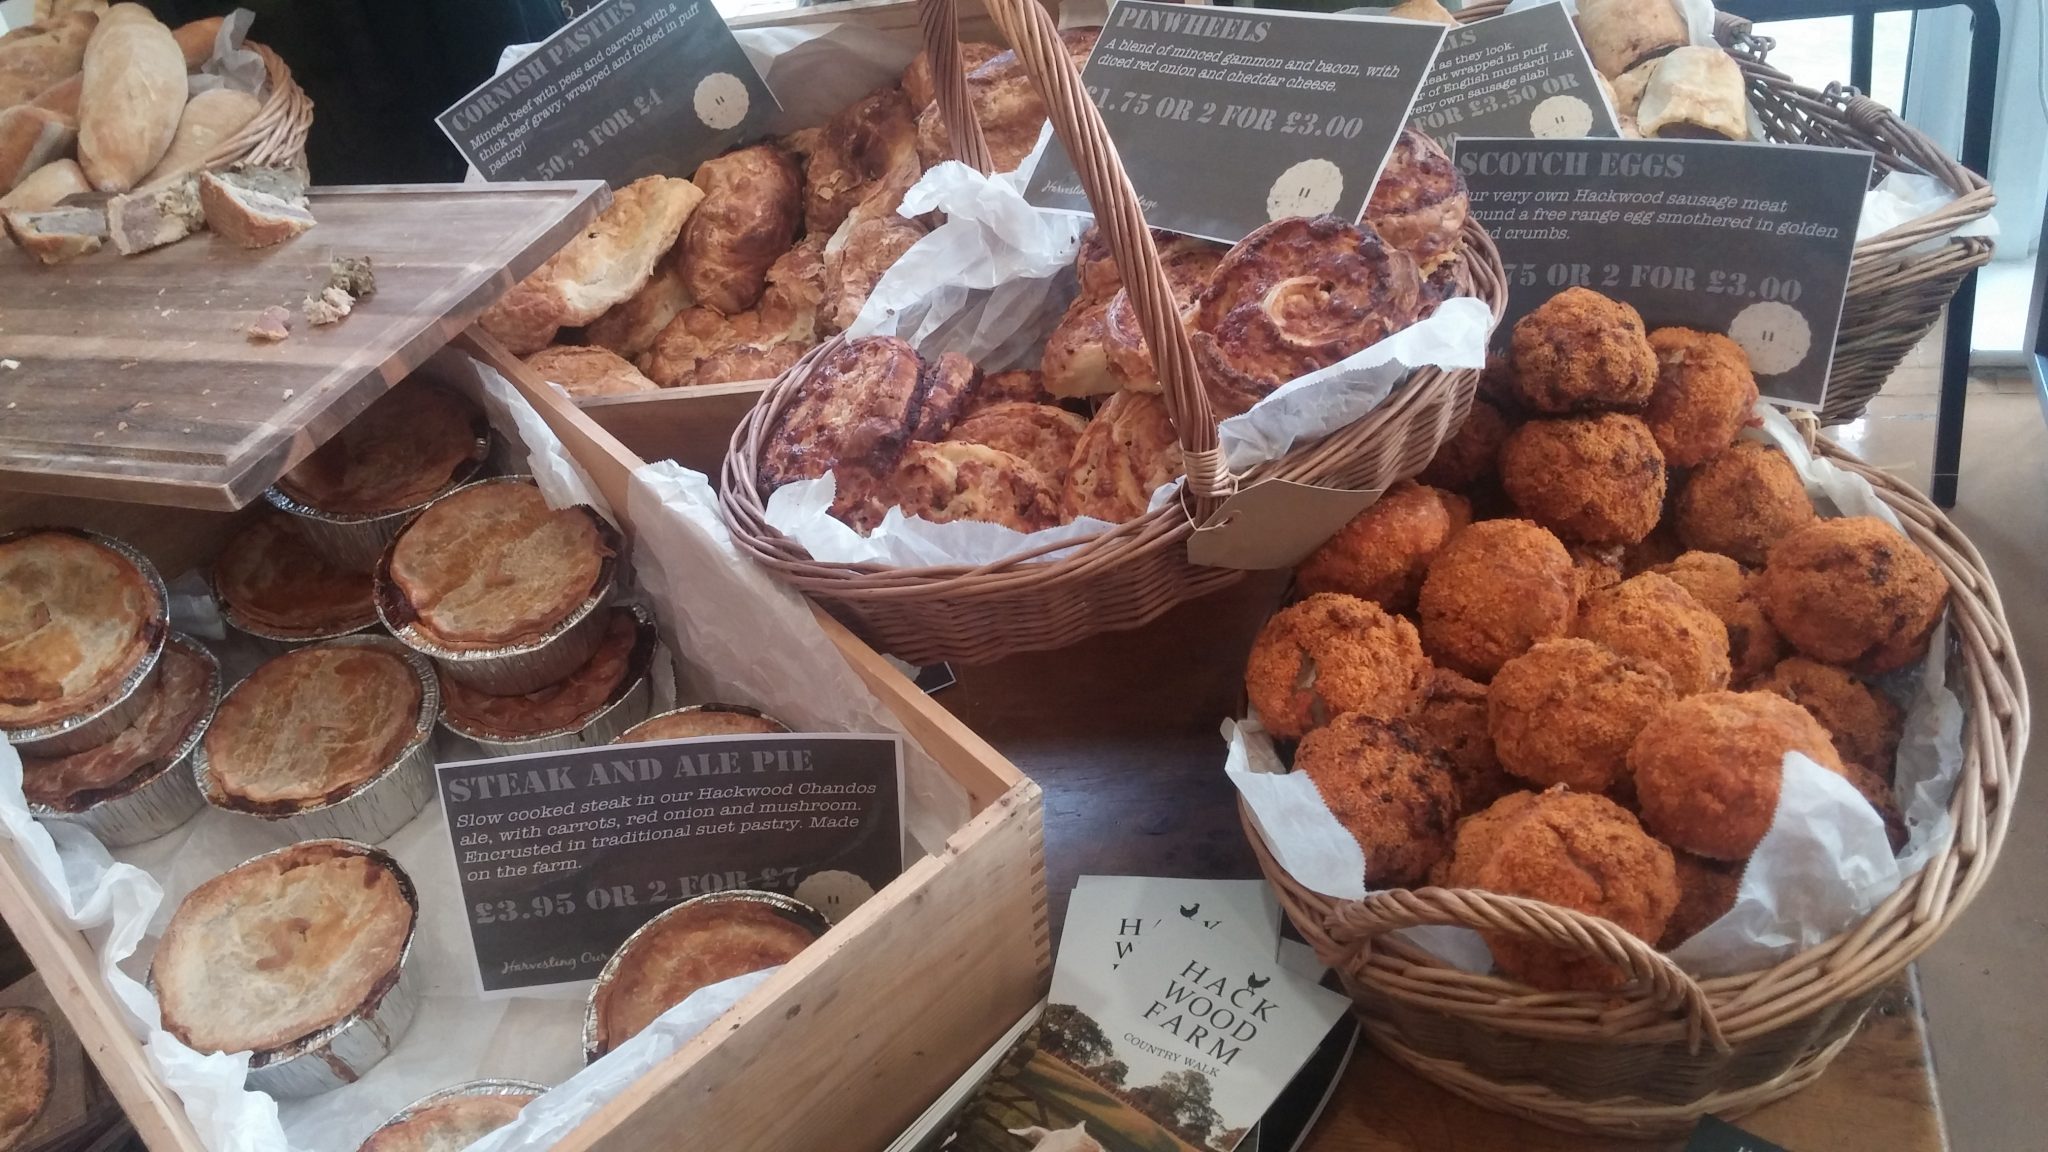 Breads, pies, pastries from Hackwood Farm, Derby